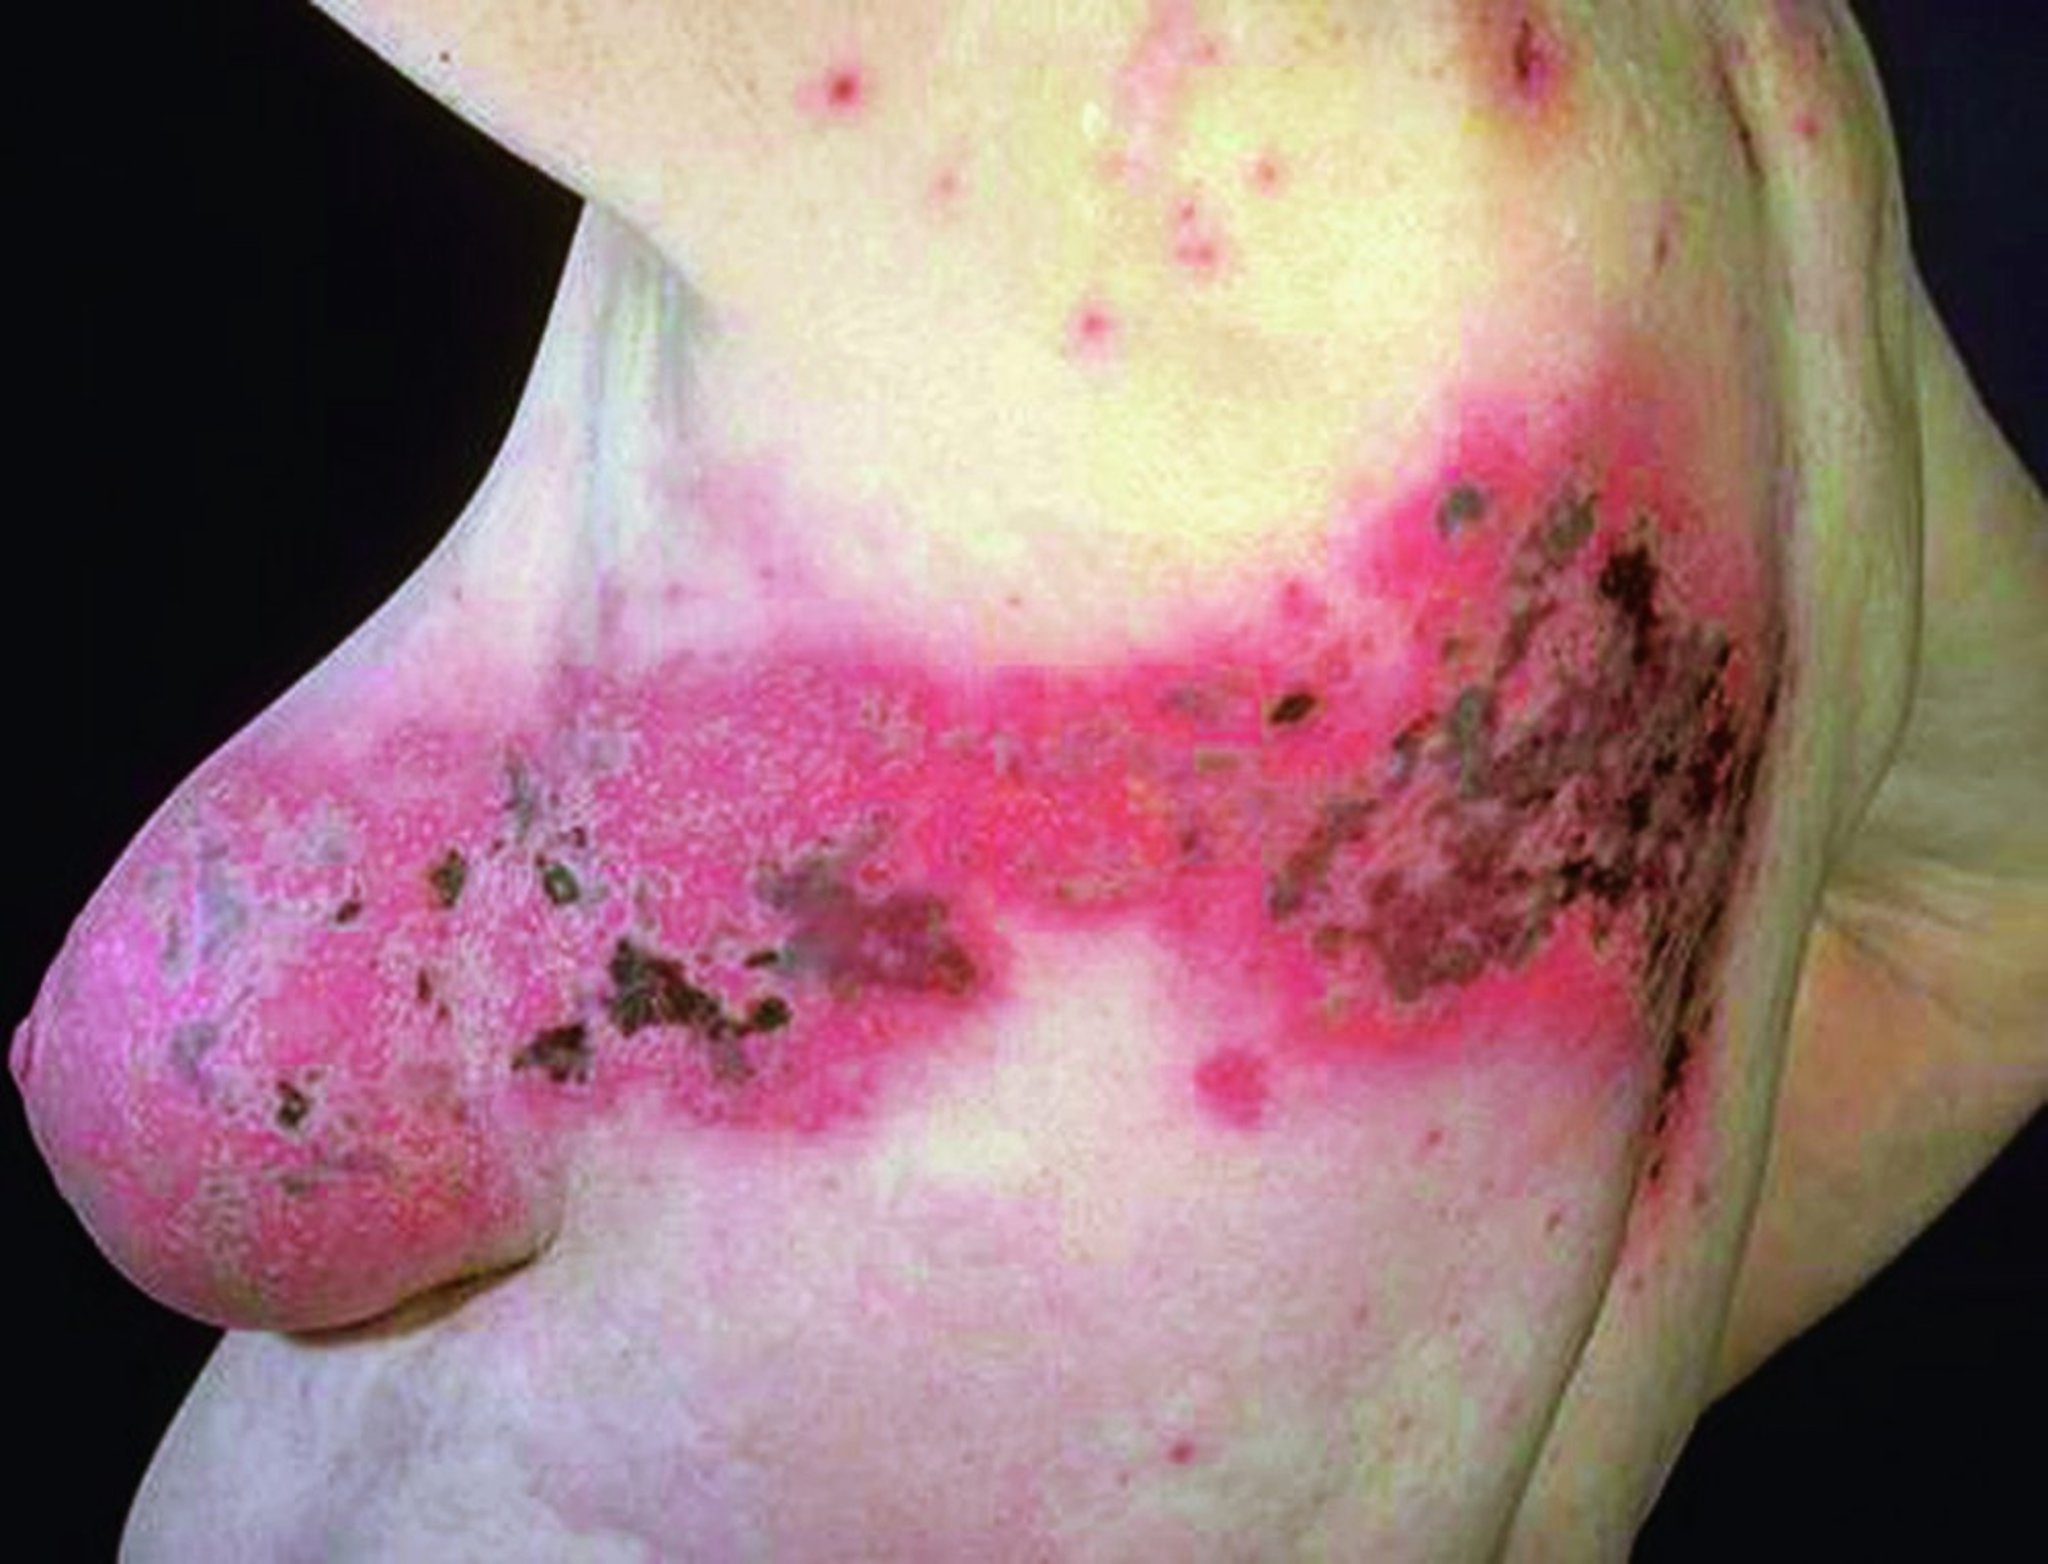 Herpes Zoster (Thoracic Dermatome)